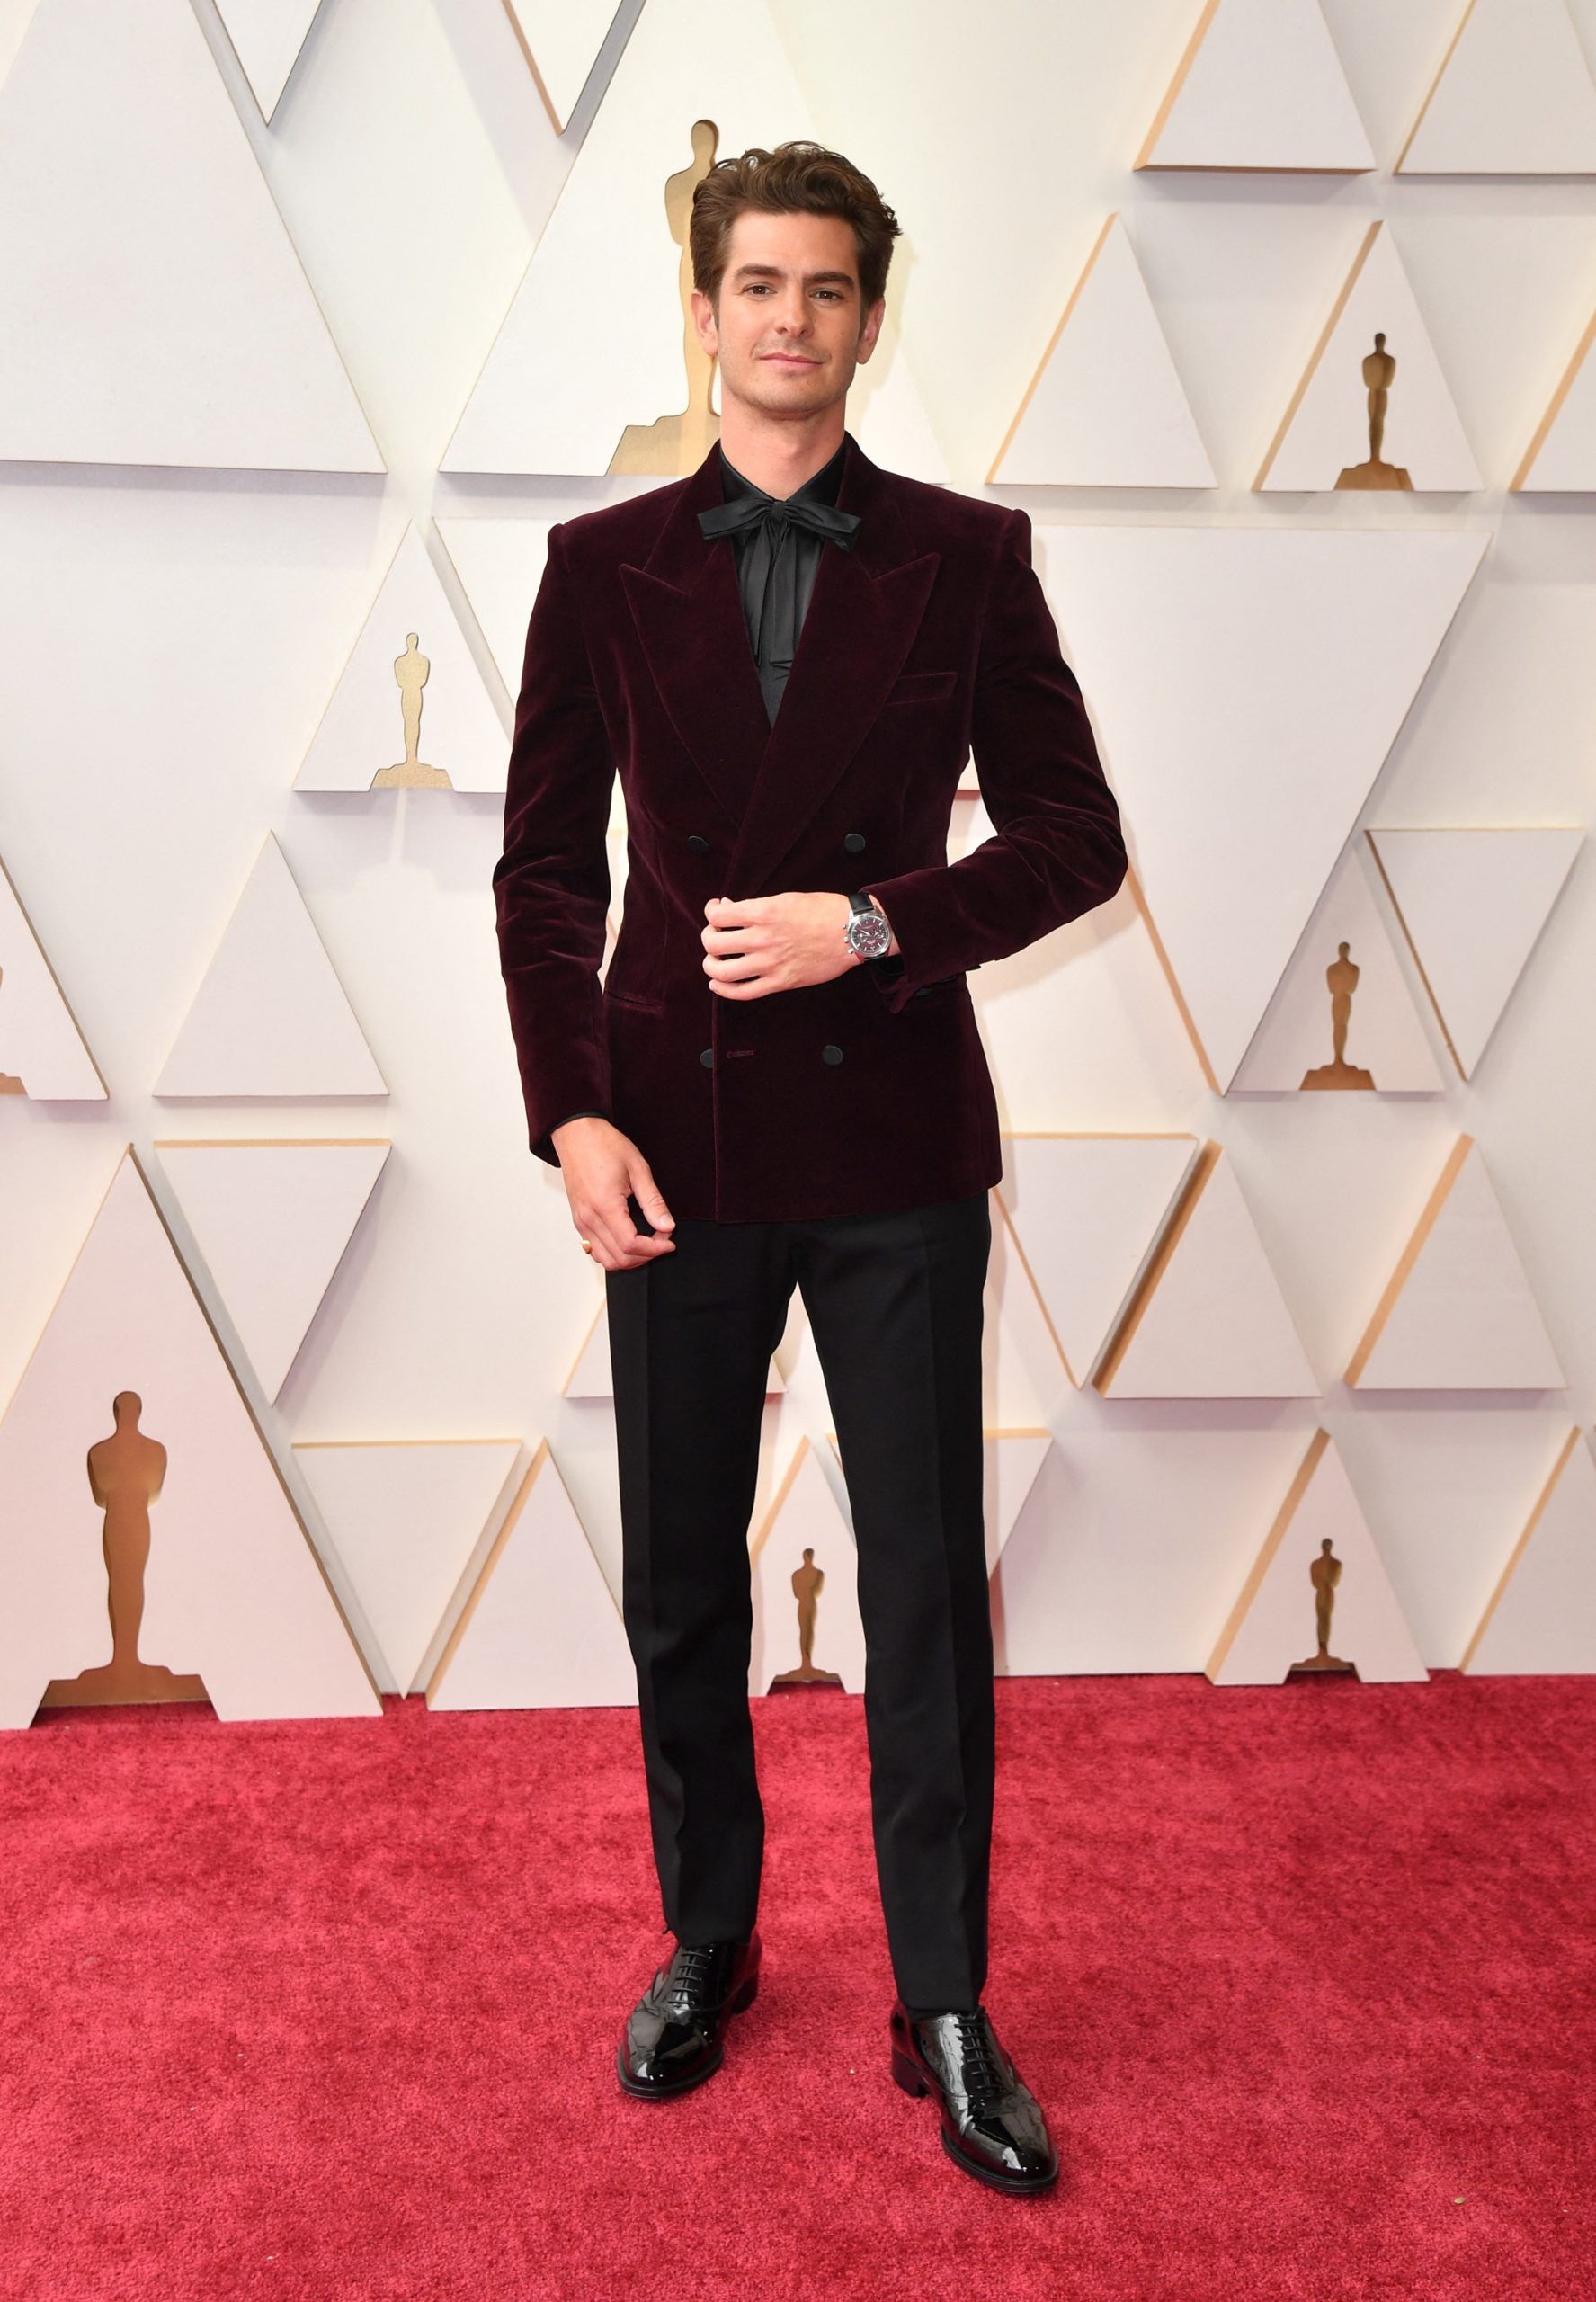 Oscars 2022: The best dressed stars on the red carpet